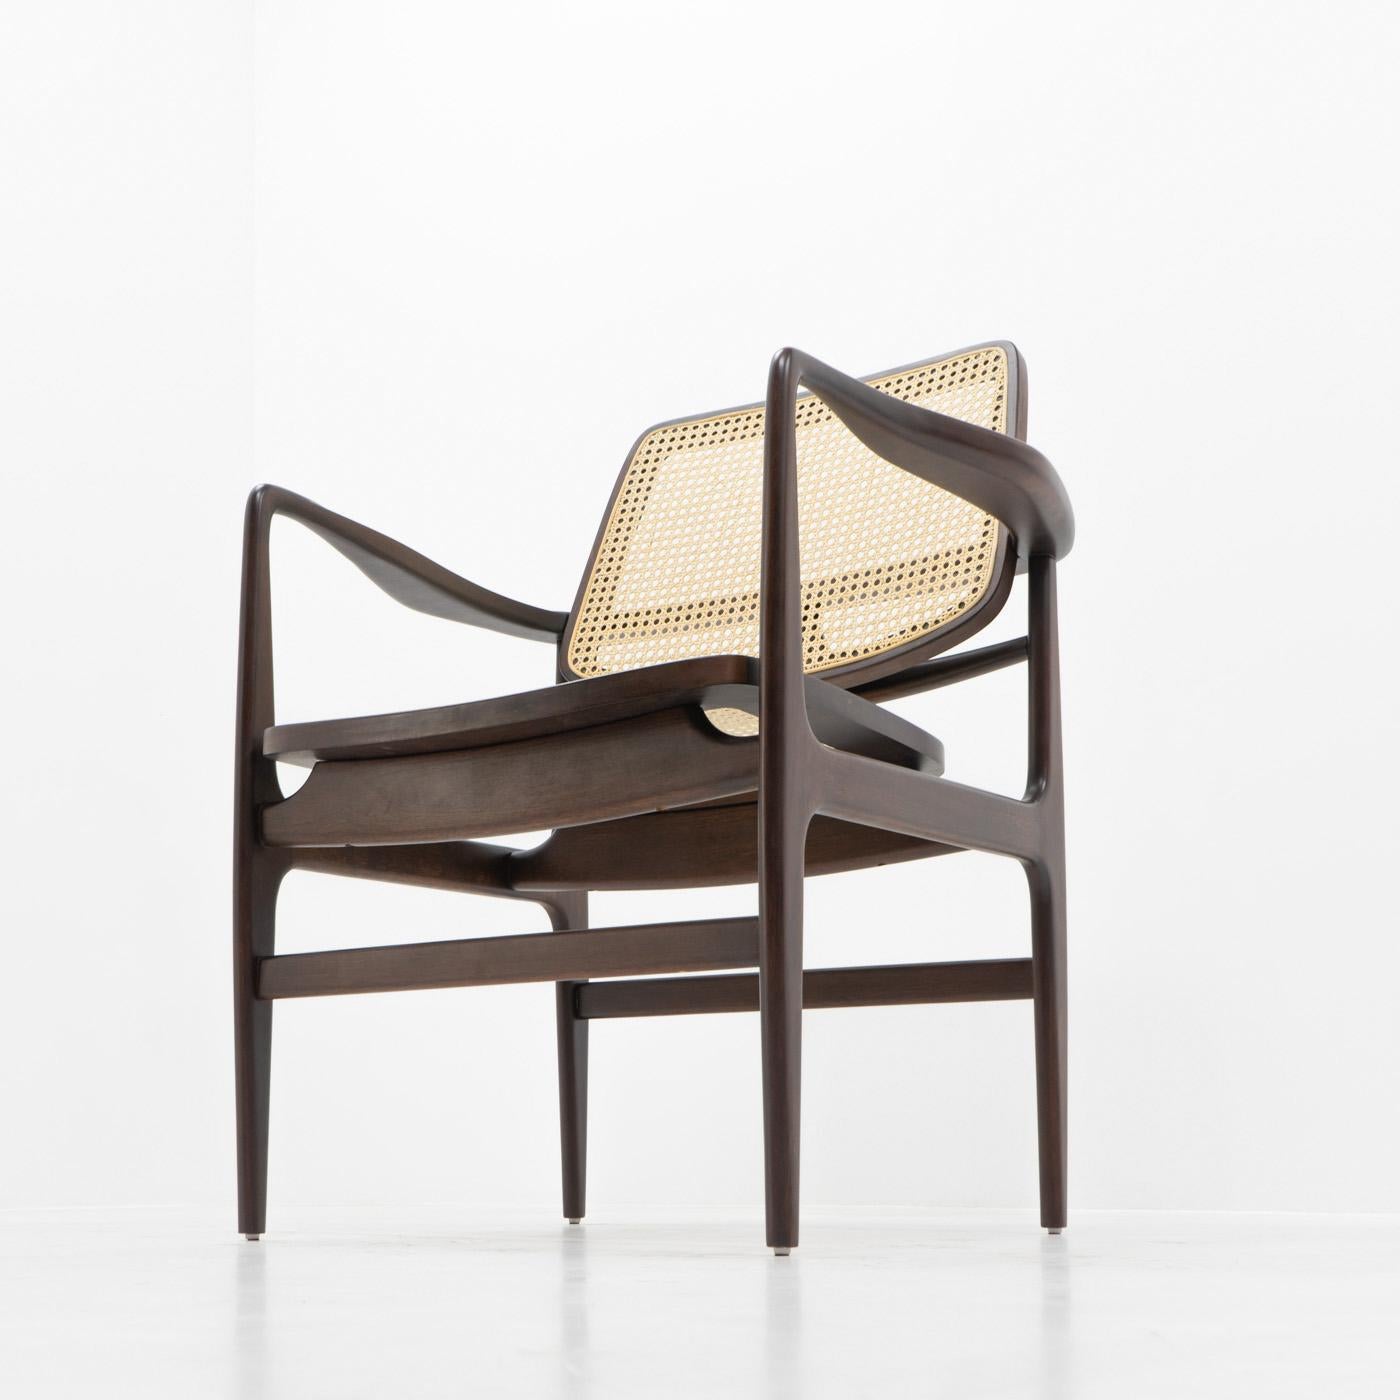 Sergio Rodrigues set the standard for Modern furniture in Brazil during the 1950s. 
His works have become a reference for Brazilian design, which often use indigenous wood species such as jacaranda and imbuia:

One of his most known designs is the